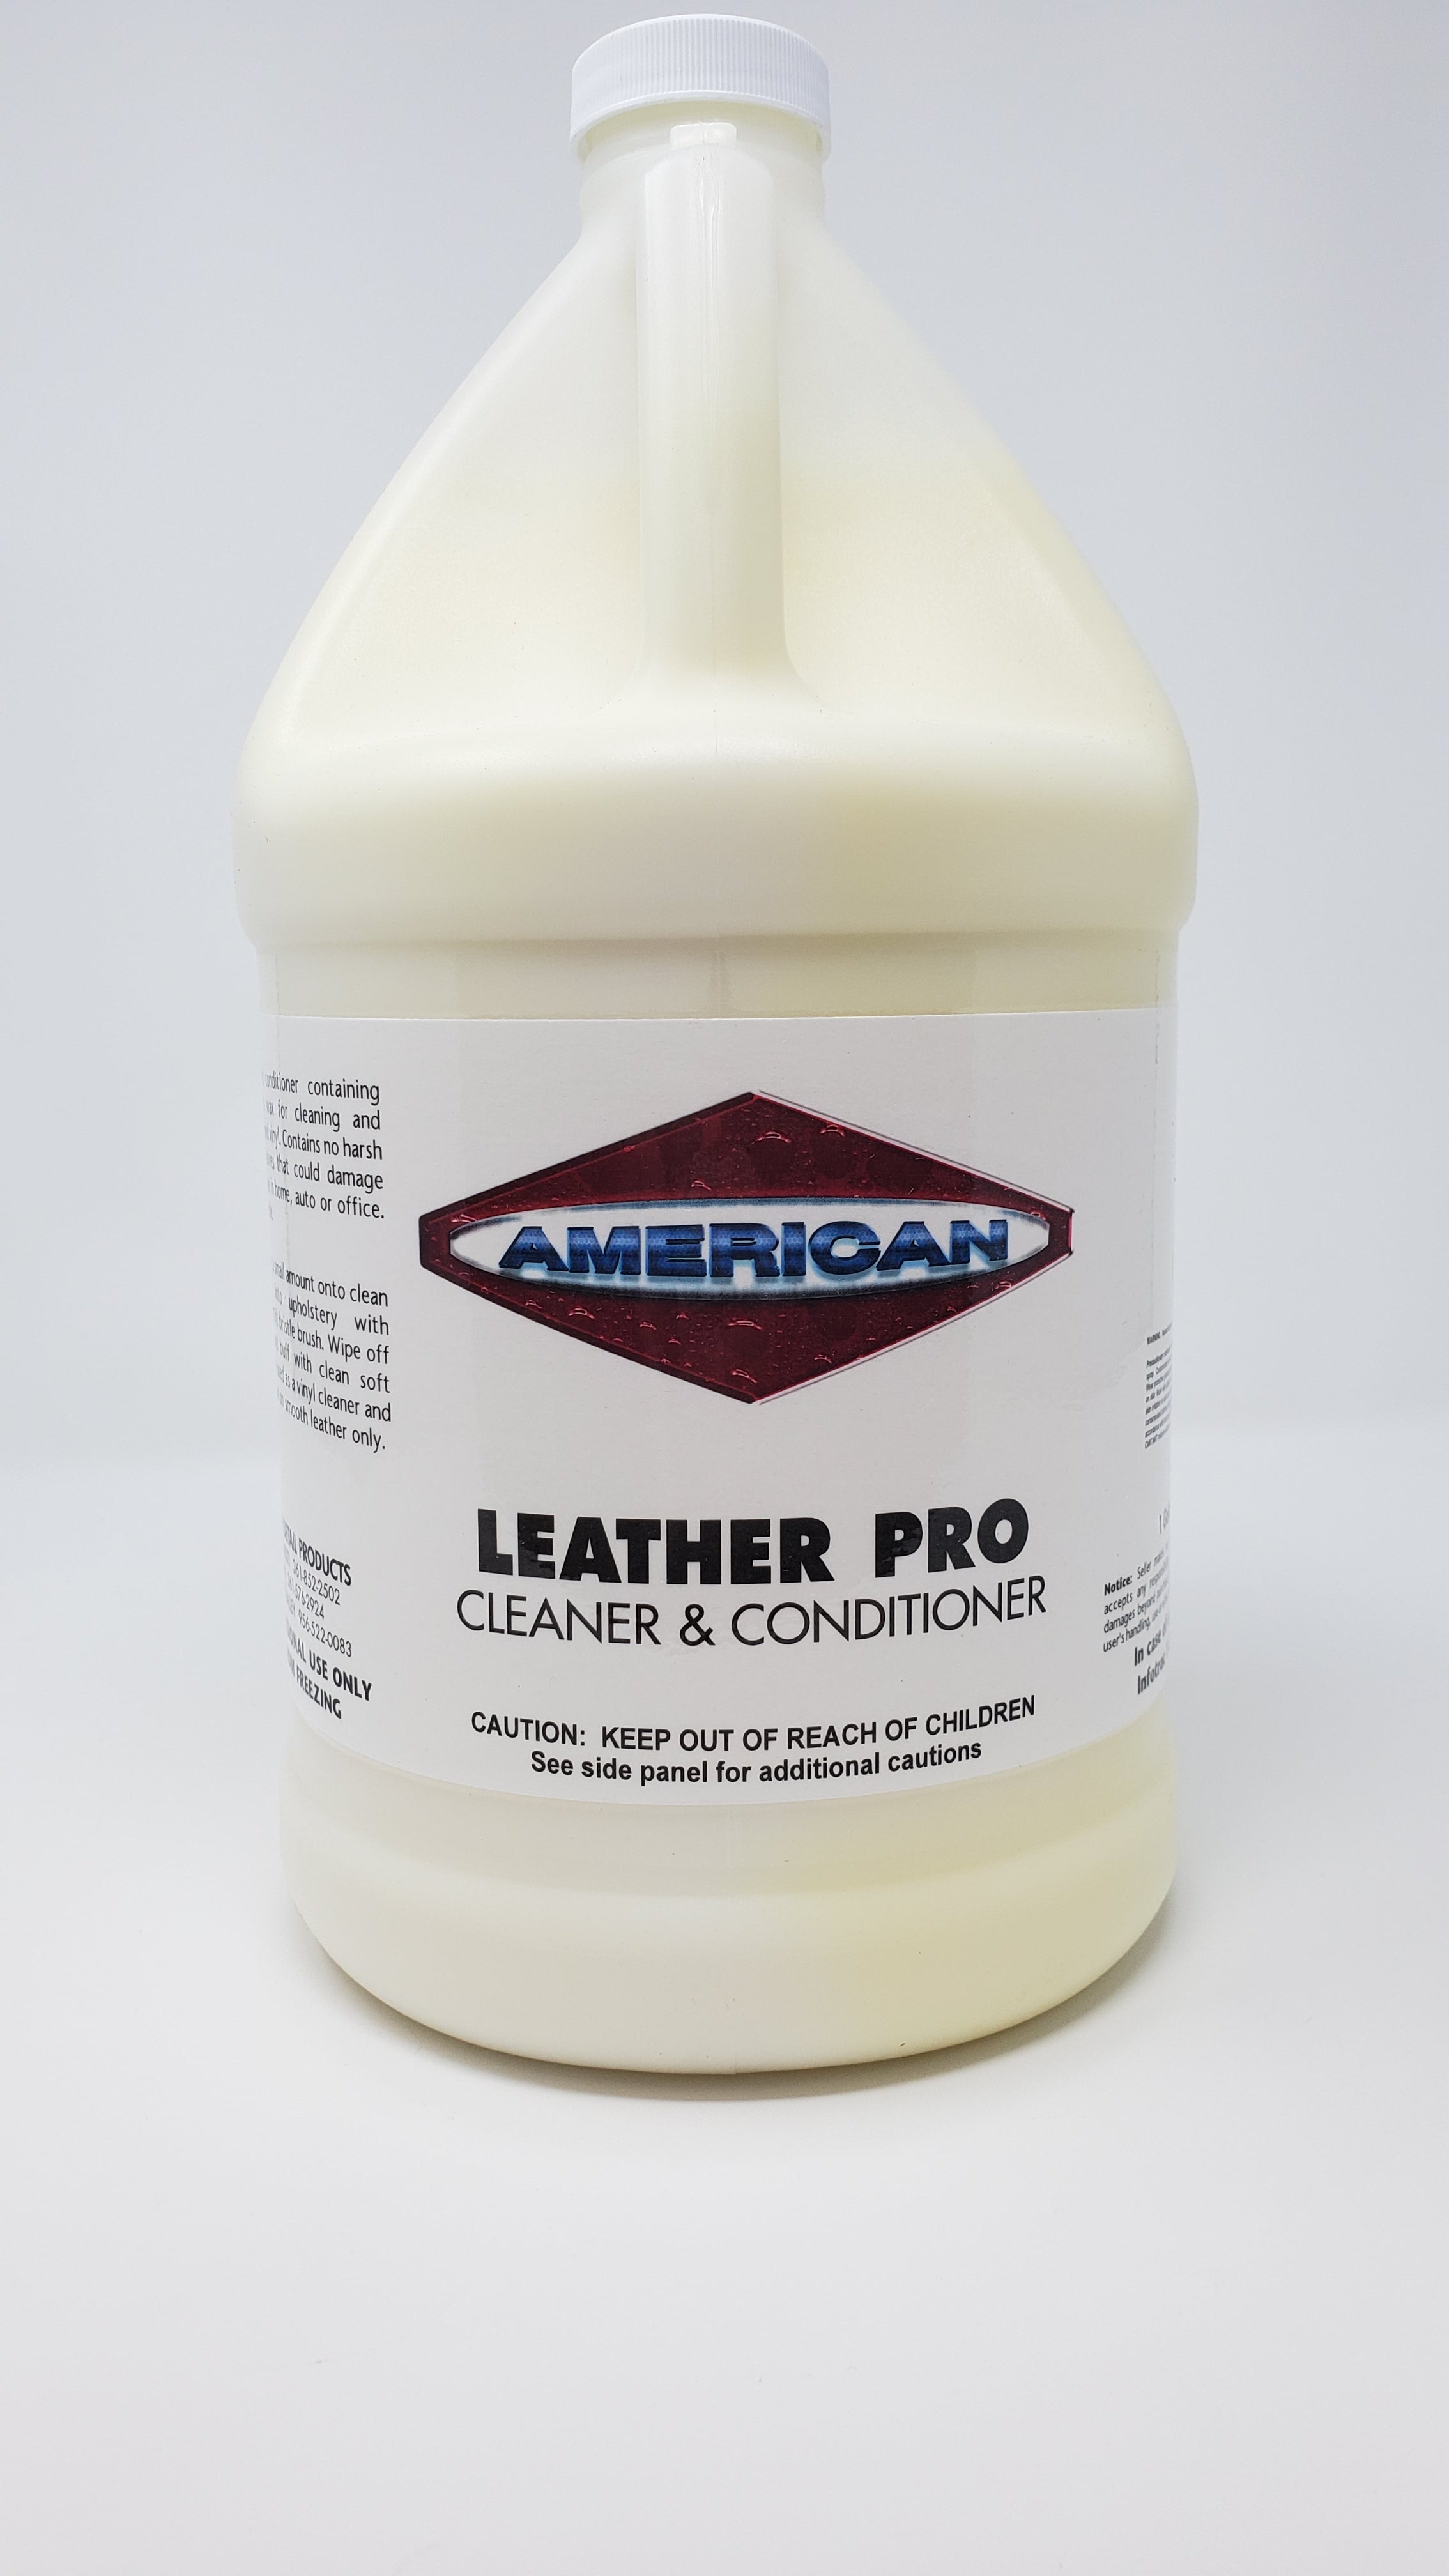 Leather Care - Pro Detailing